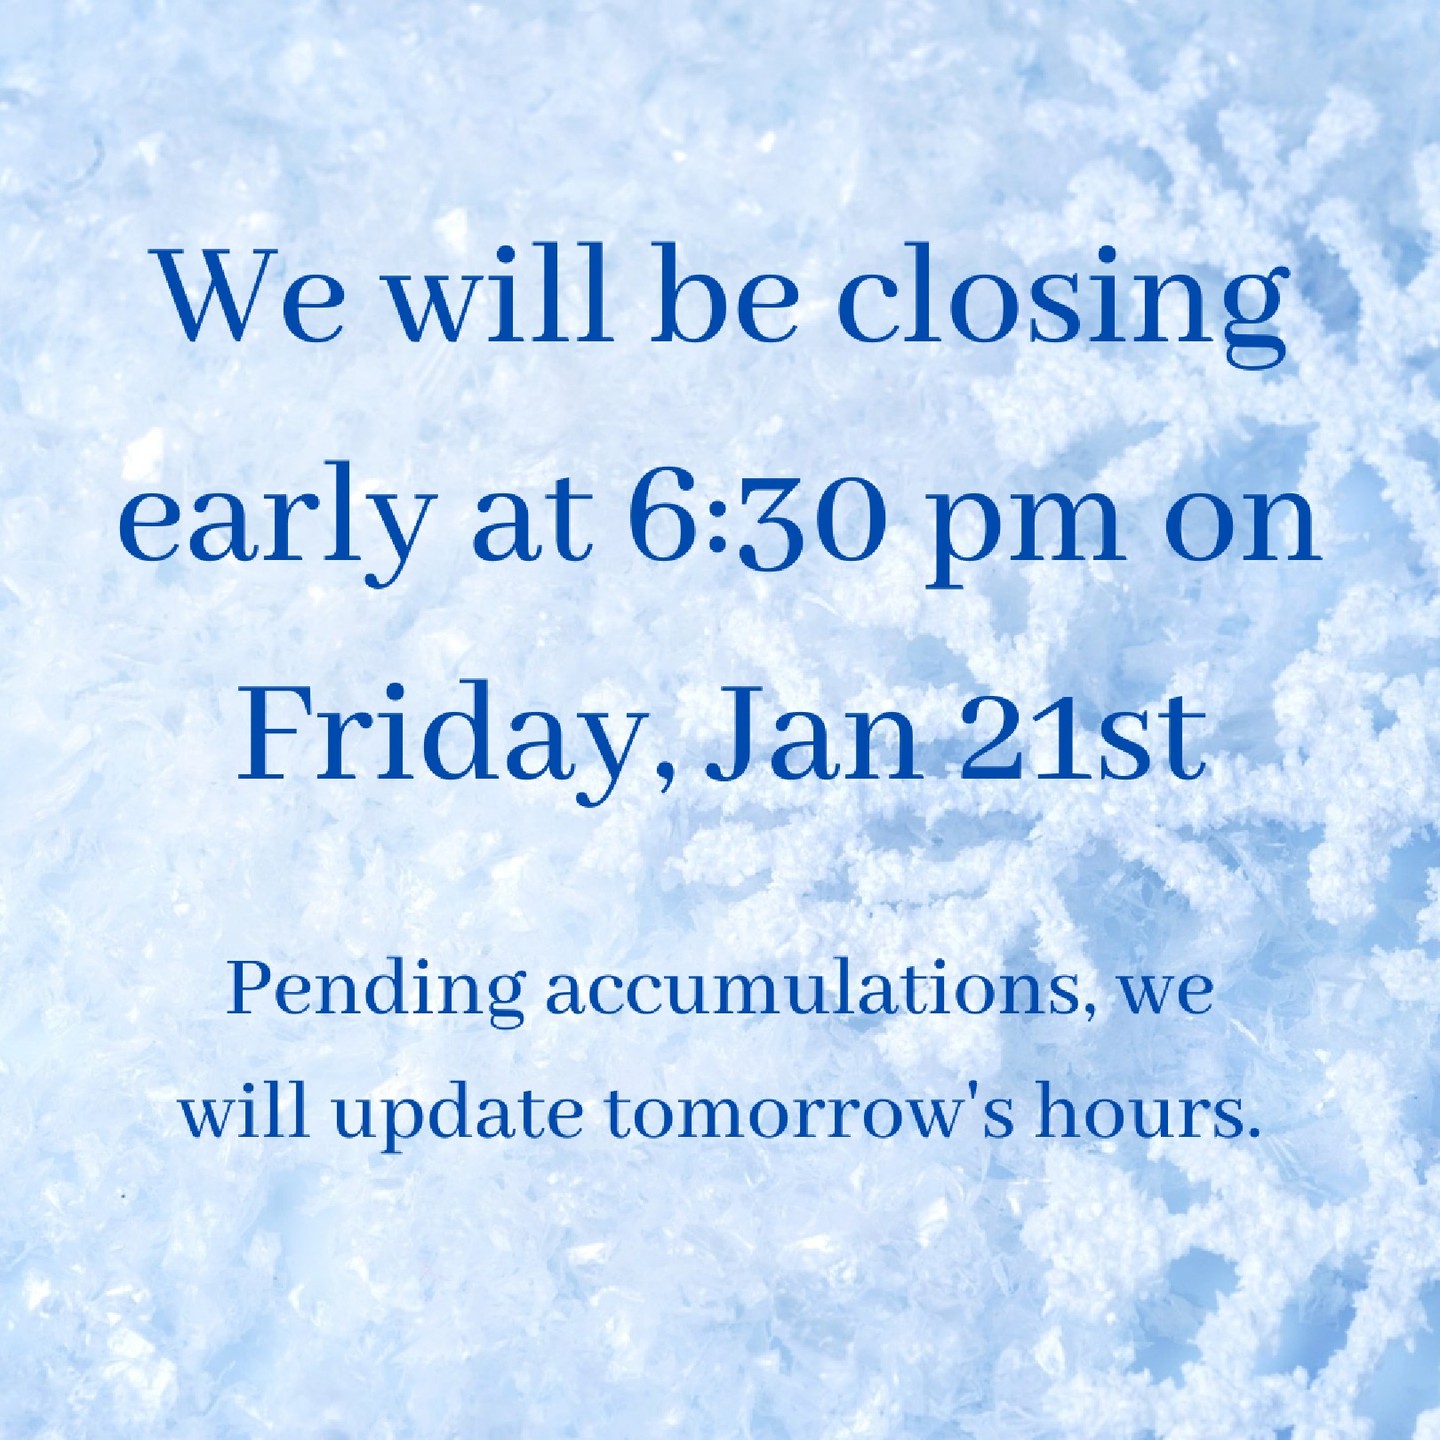 We will be closing early at 6:30 pm on Friday, Jan 21st. Pending accumulations, we will update tomorrow's hours.